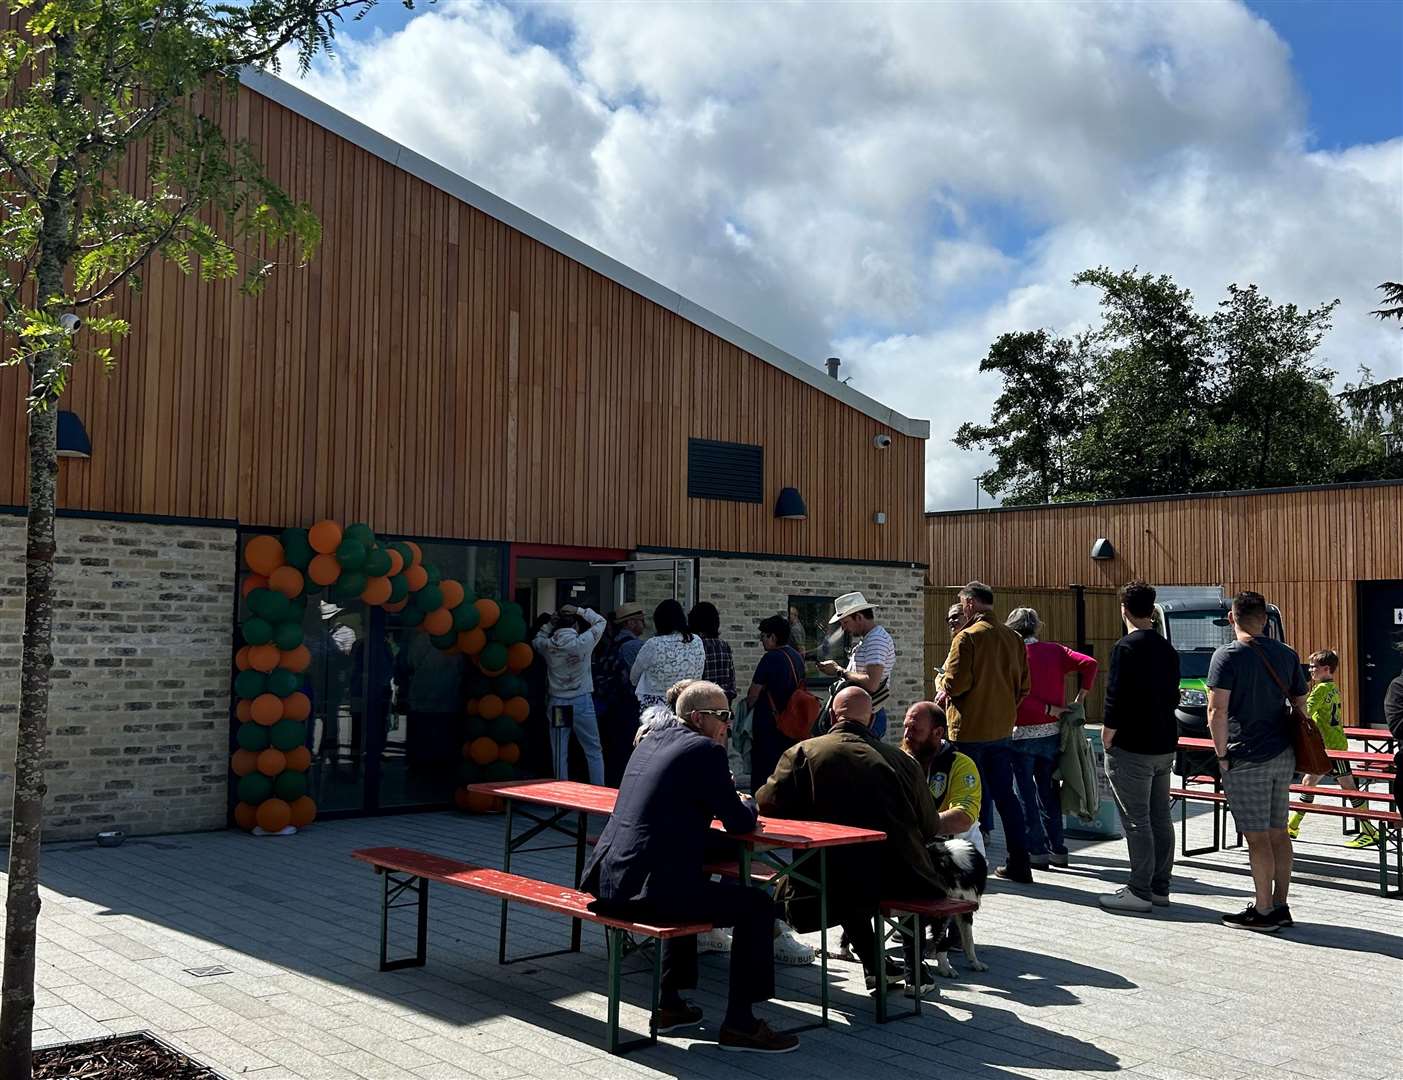 The new community building homes a cafe, refurbished nursery and public toilets. Picture: Ashford Borough Council